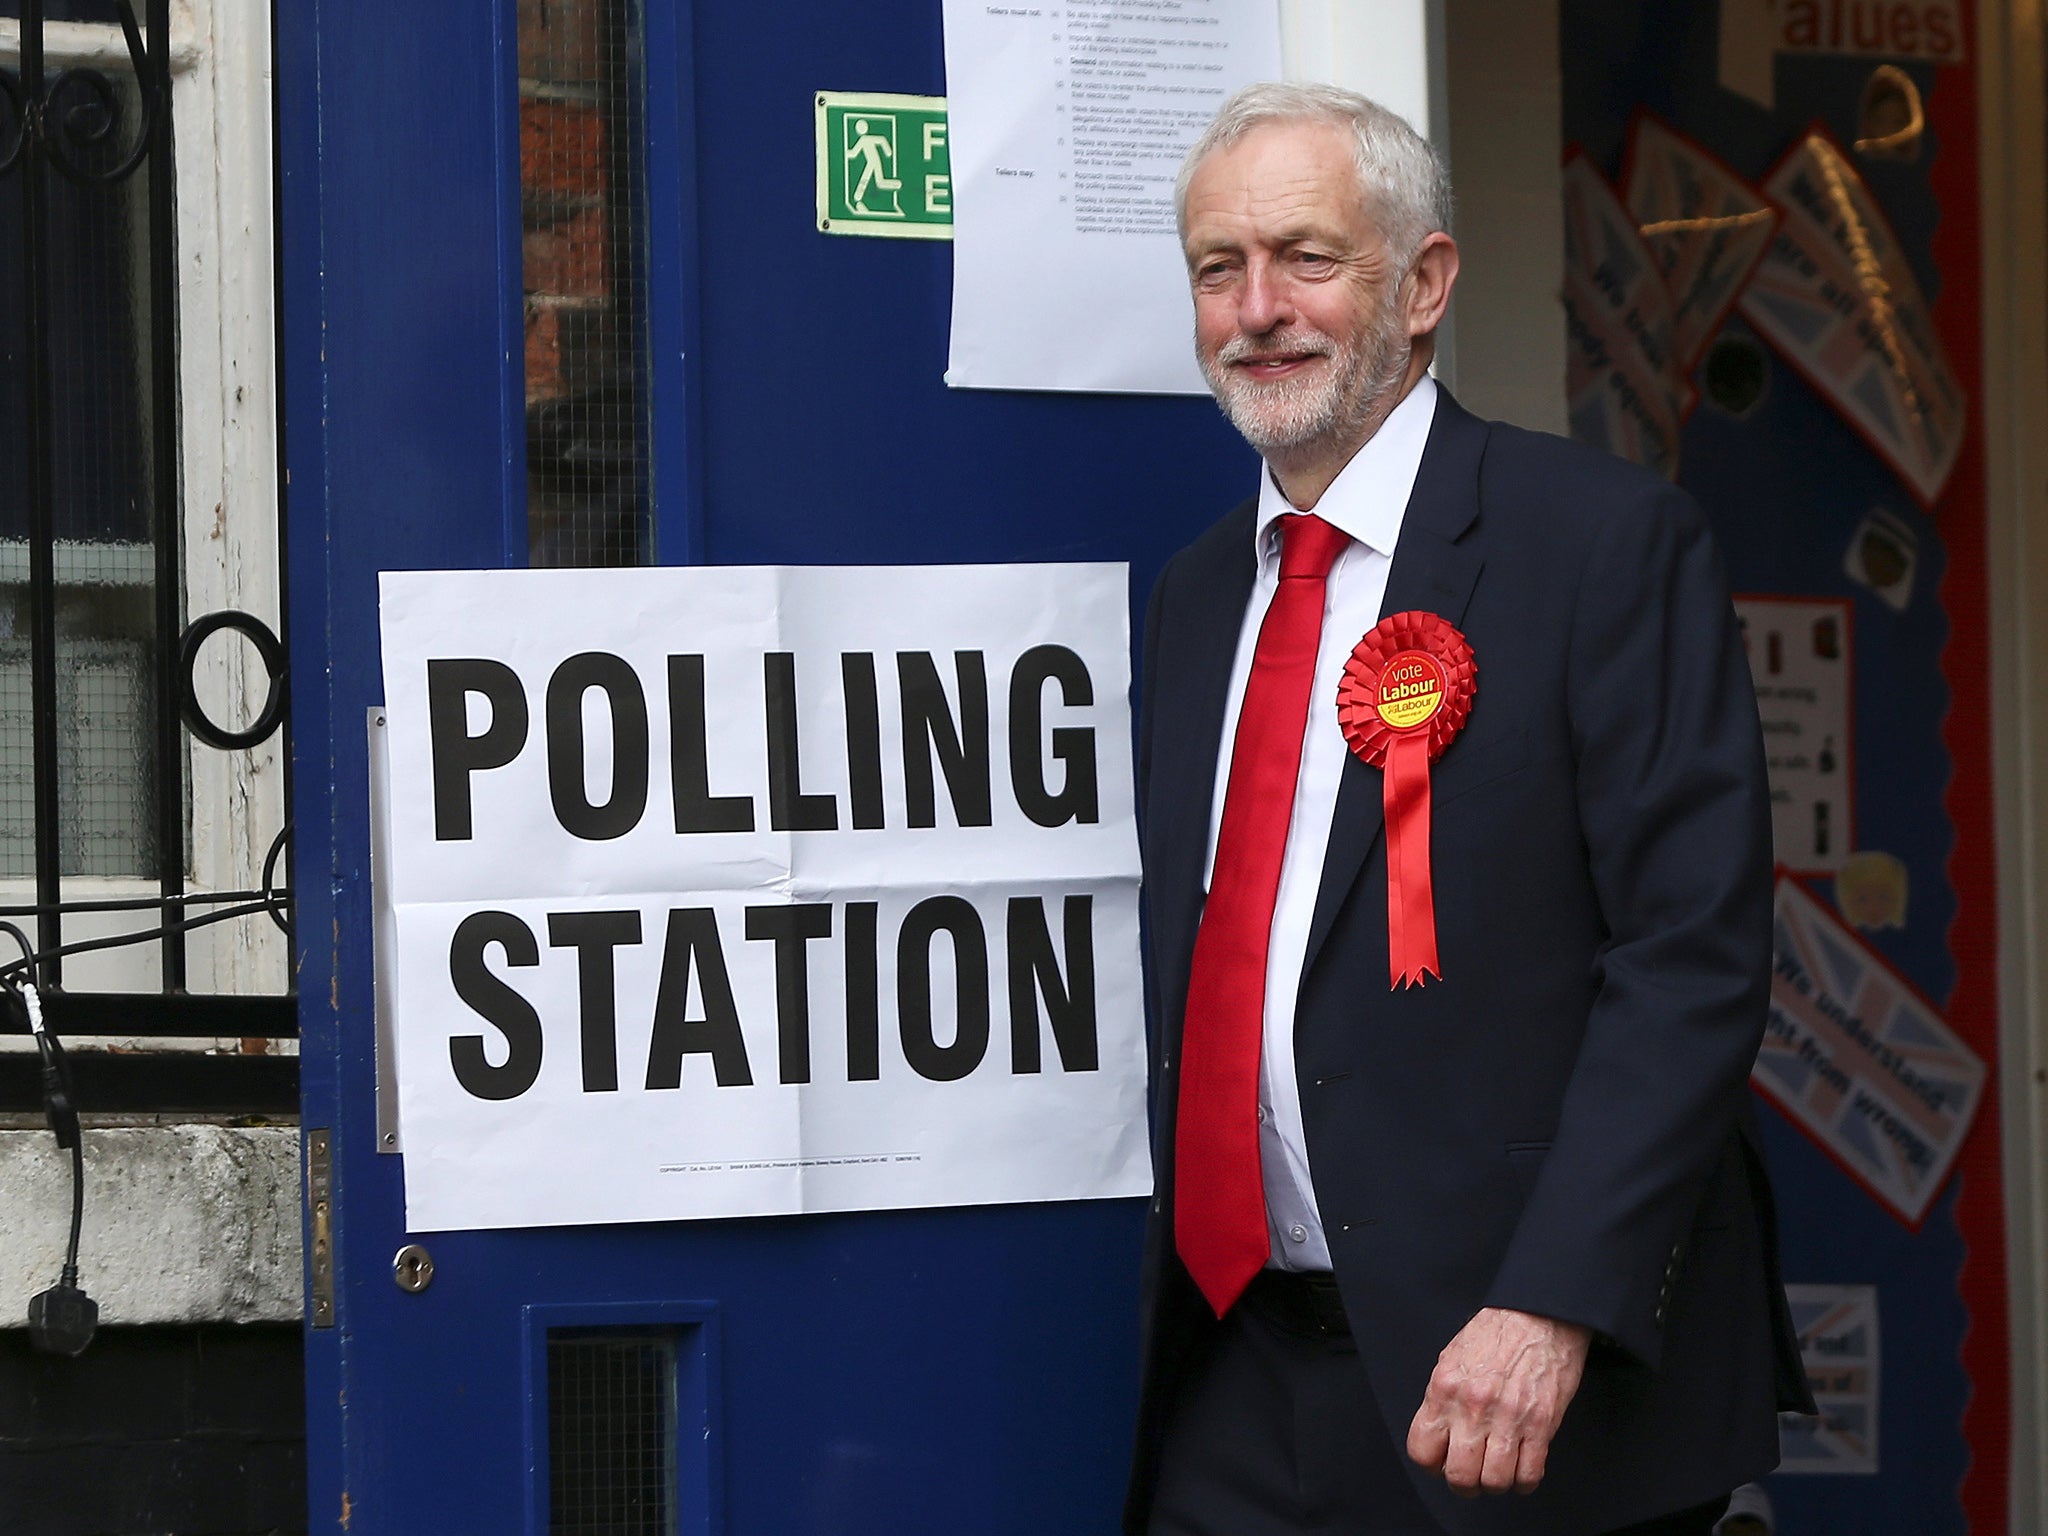 Jeremy Corbyn, leader of Britain's opposition Labour Party leaves after voting at a polling station in Islington, London